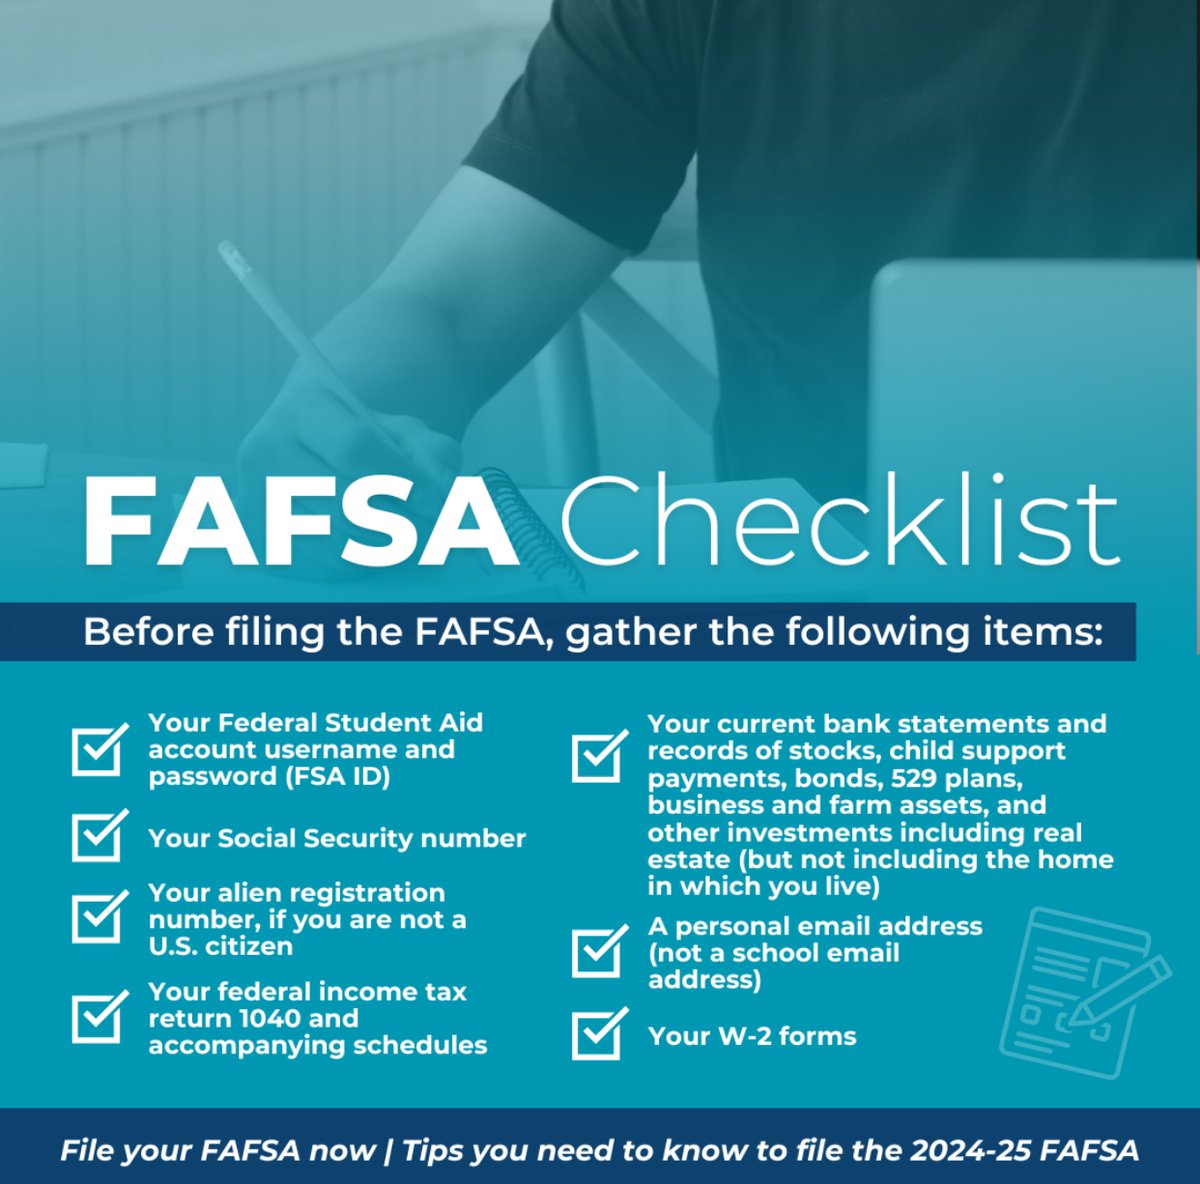 Have you filed for the 2024-2025 FAFSA yet? Make sure you have the following items together when you file. You can visit studentaid.gov to file today!